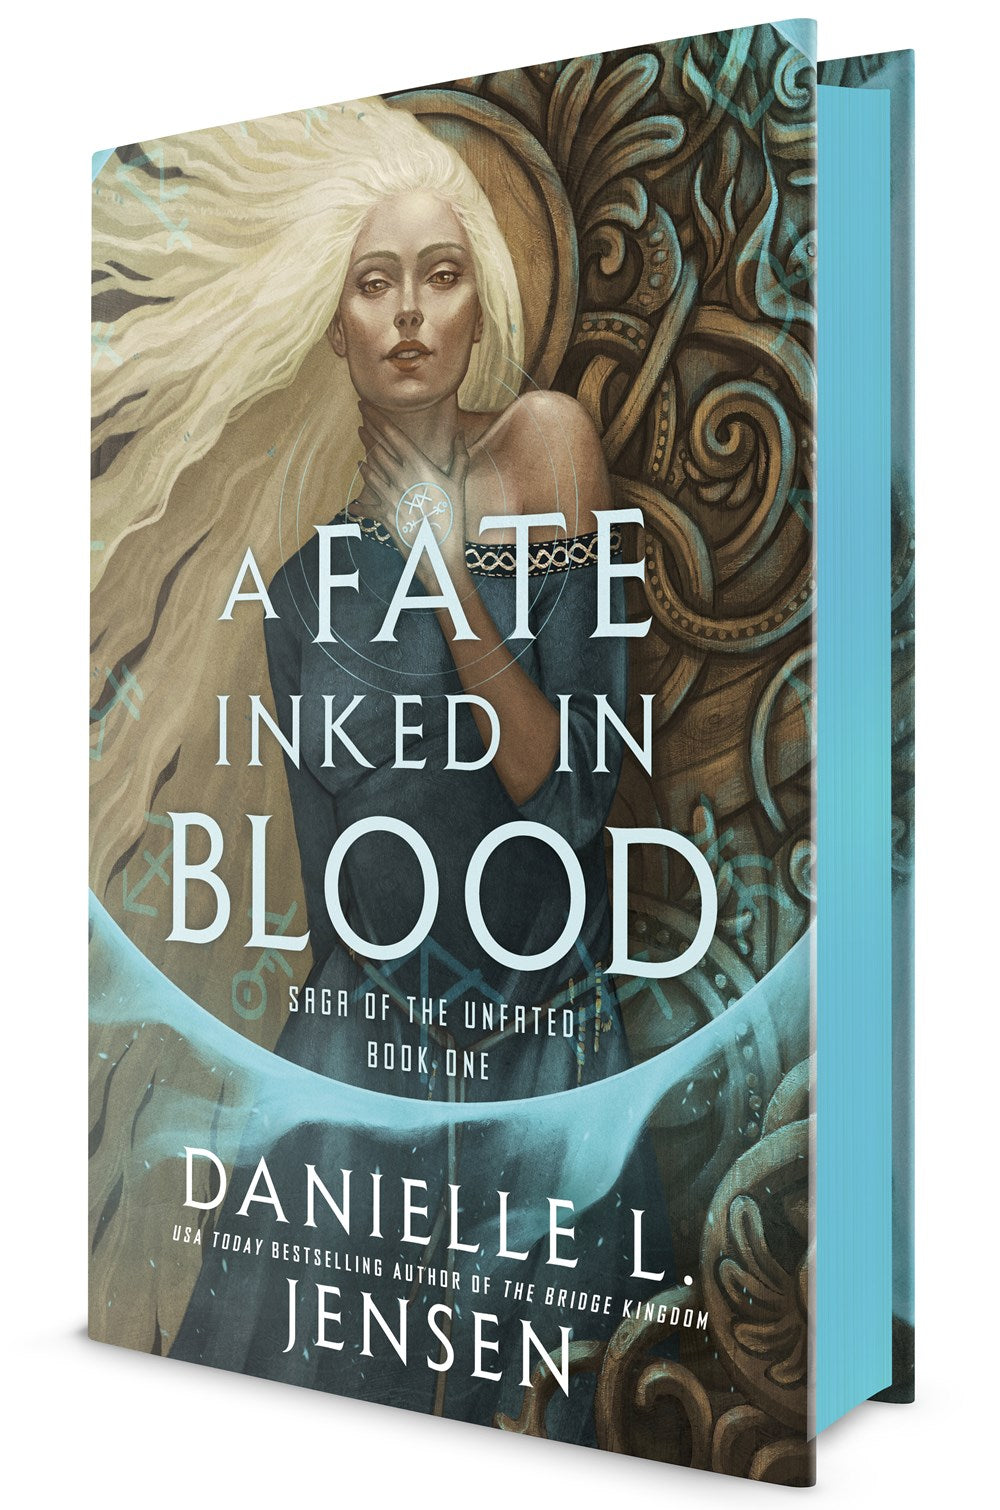 A Fate Inked in Blood : Book One of the Saga of the Unfated